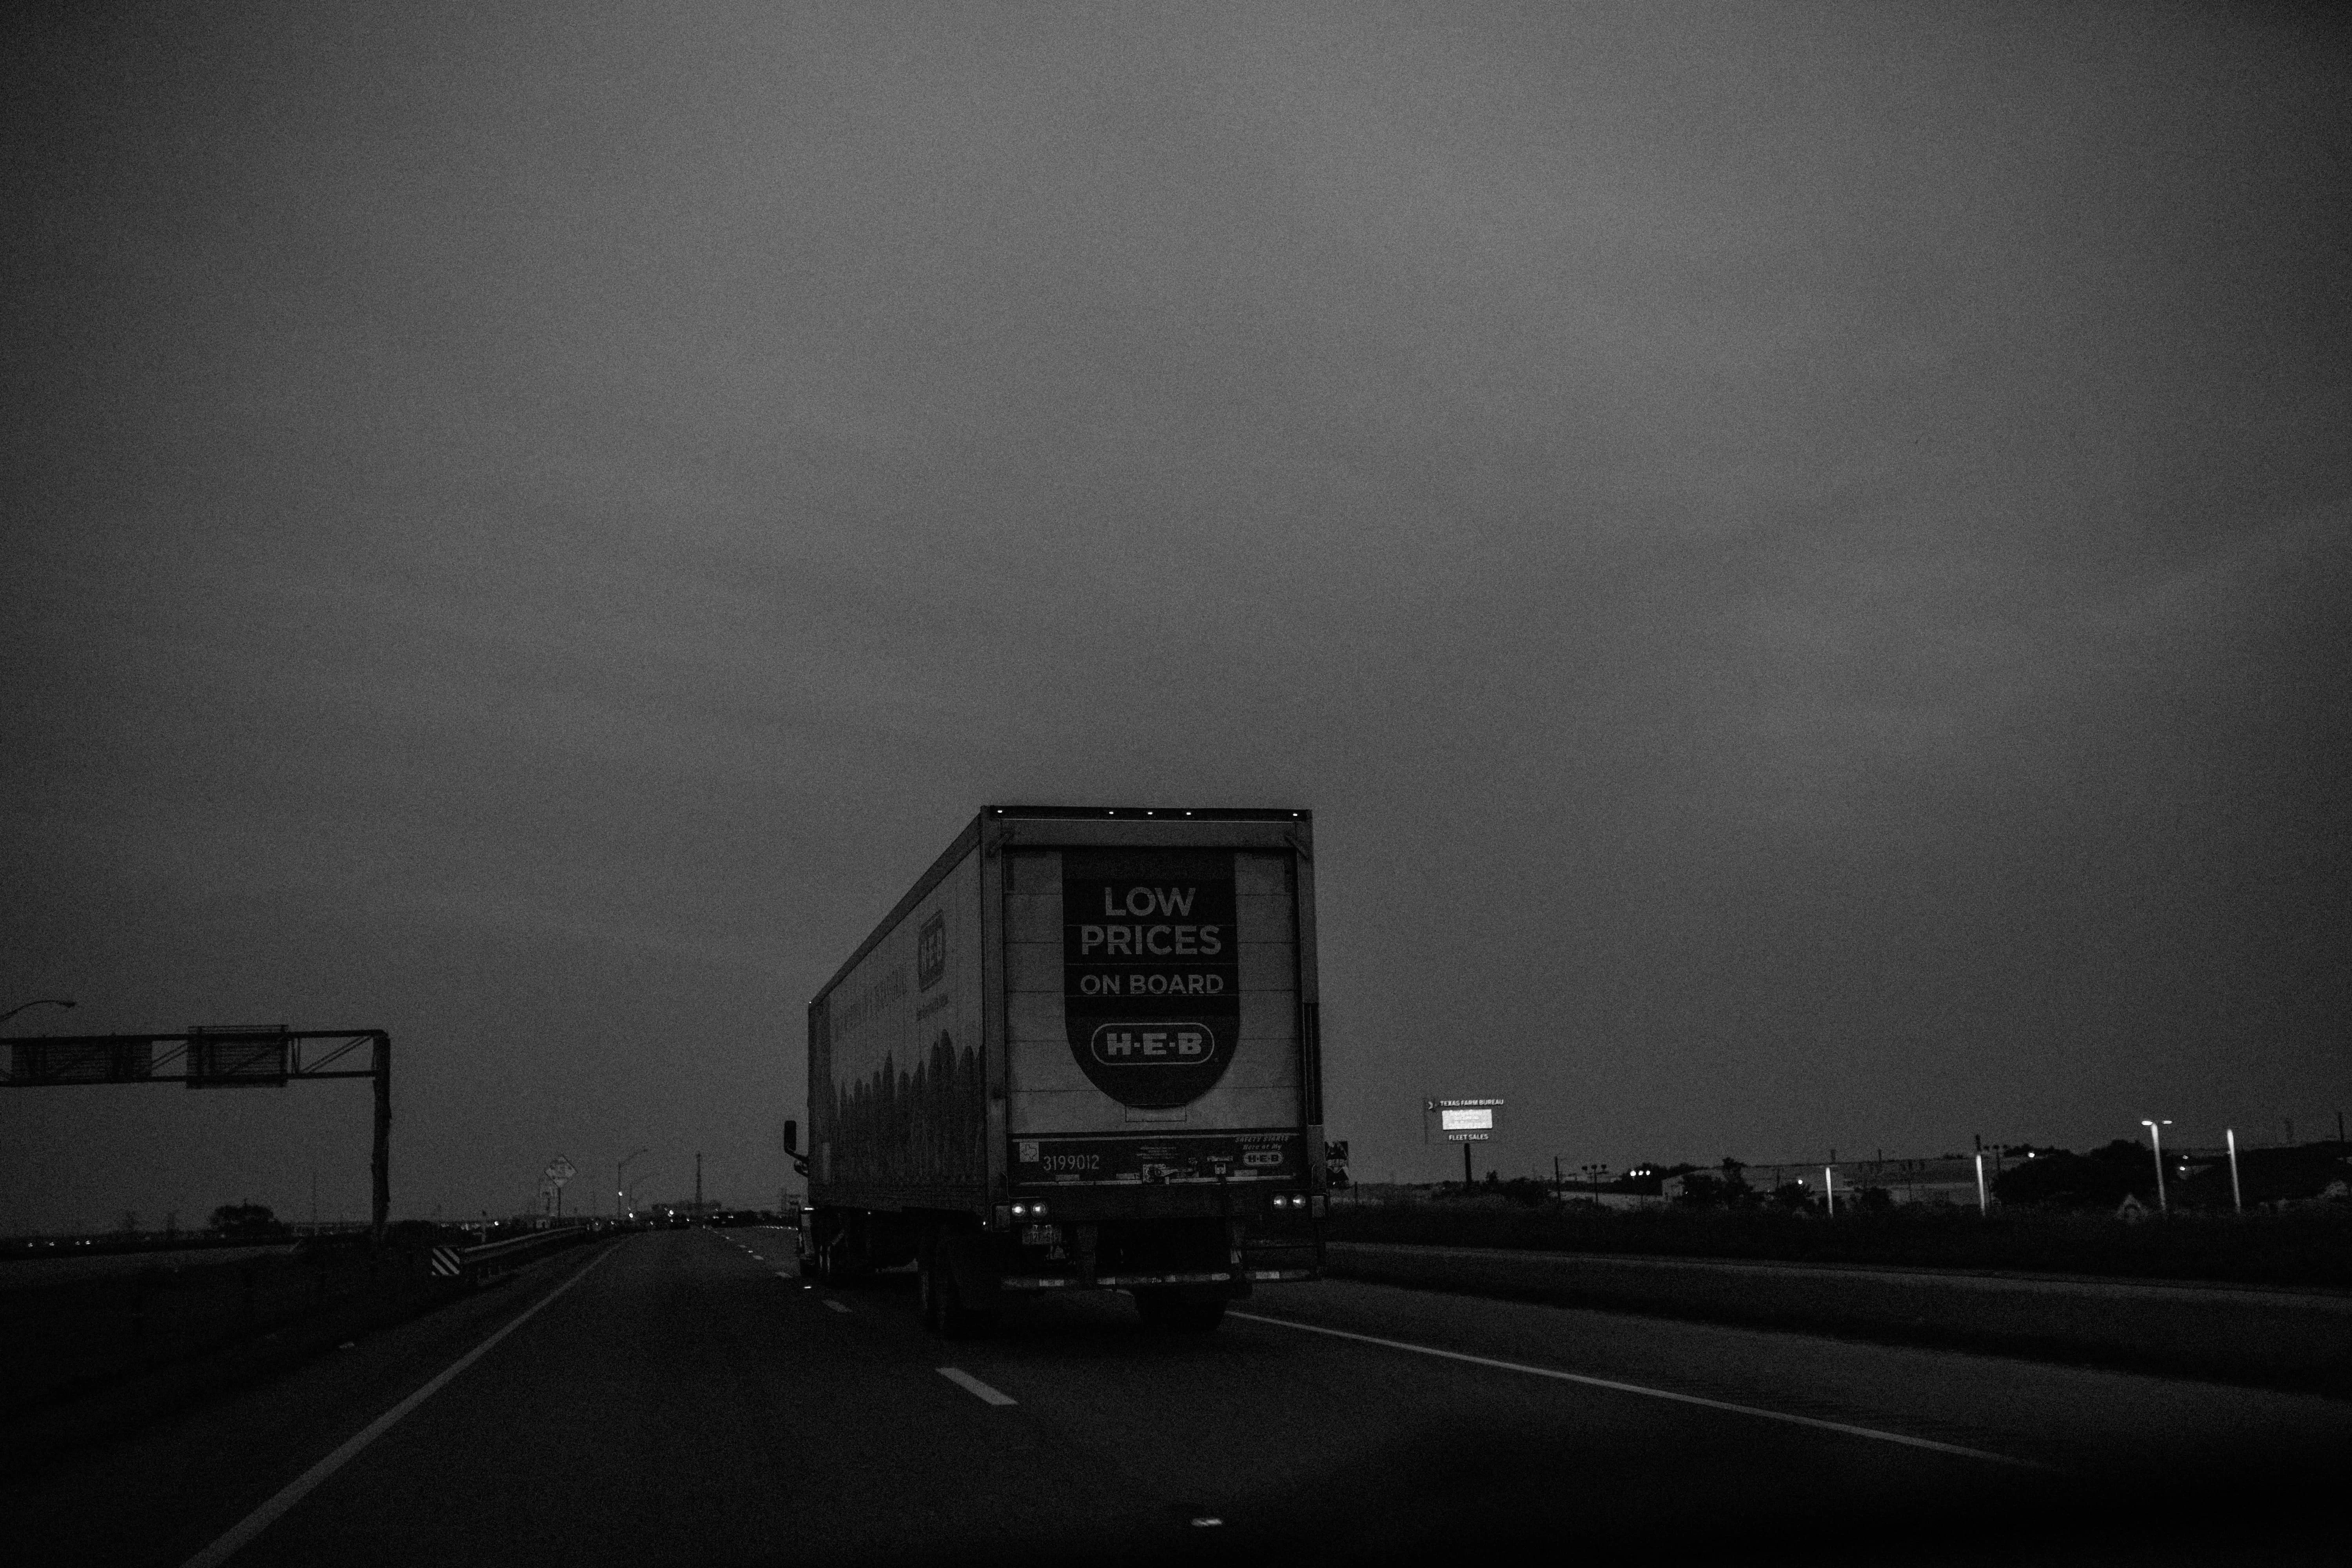 Truck on the road in grayscale